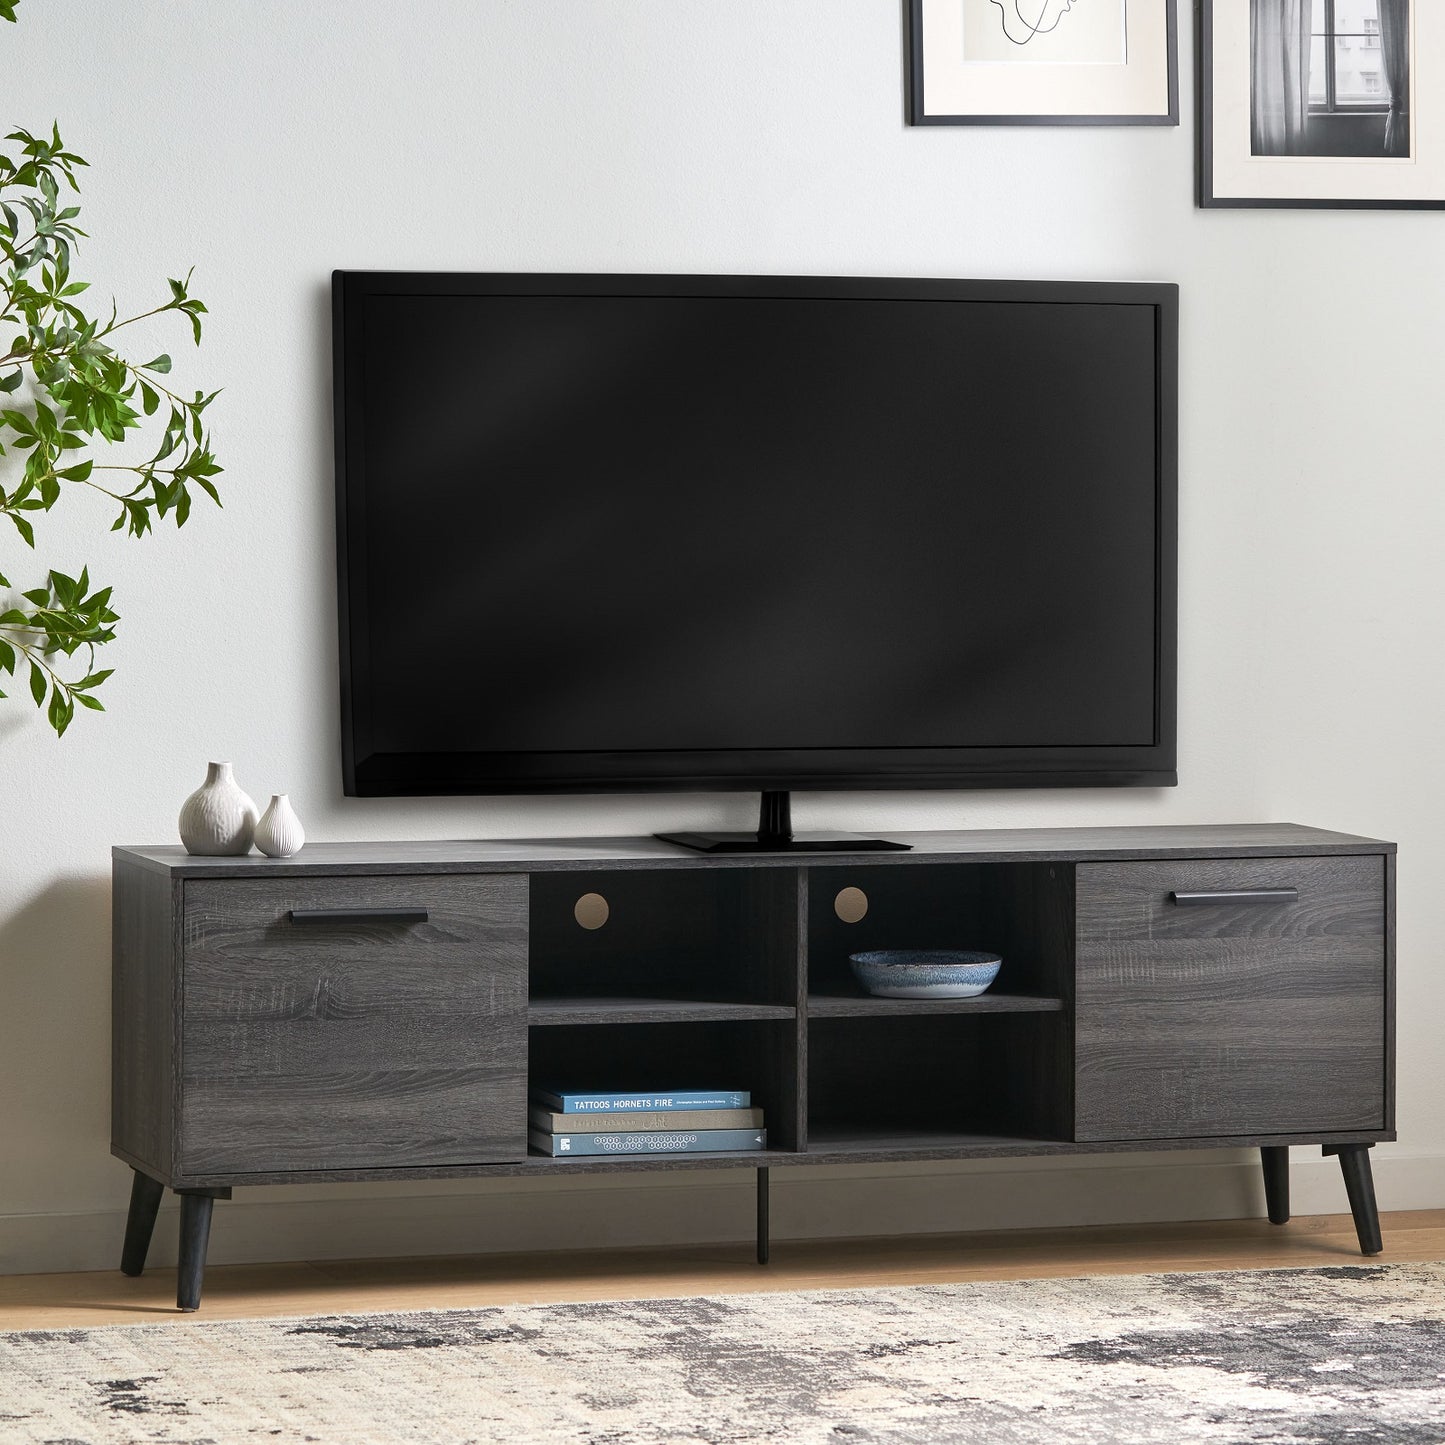 Algherohein Wood 70 Inch TV Stand with 4 Shelves and doors,Storage TV cabinet entertainment center